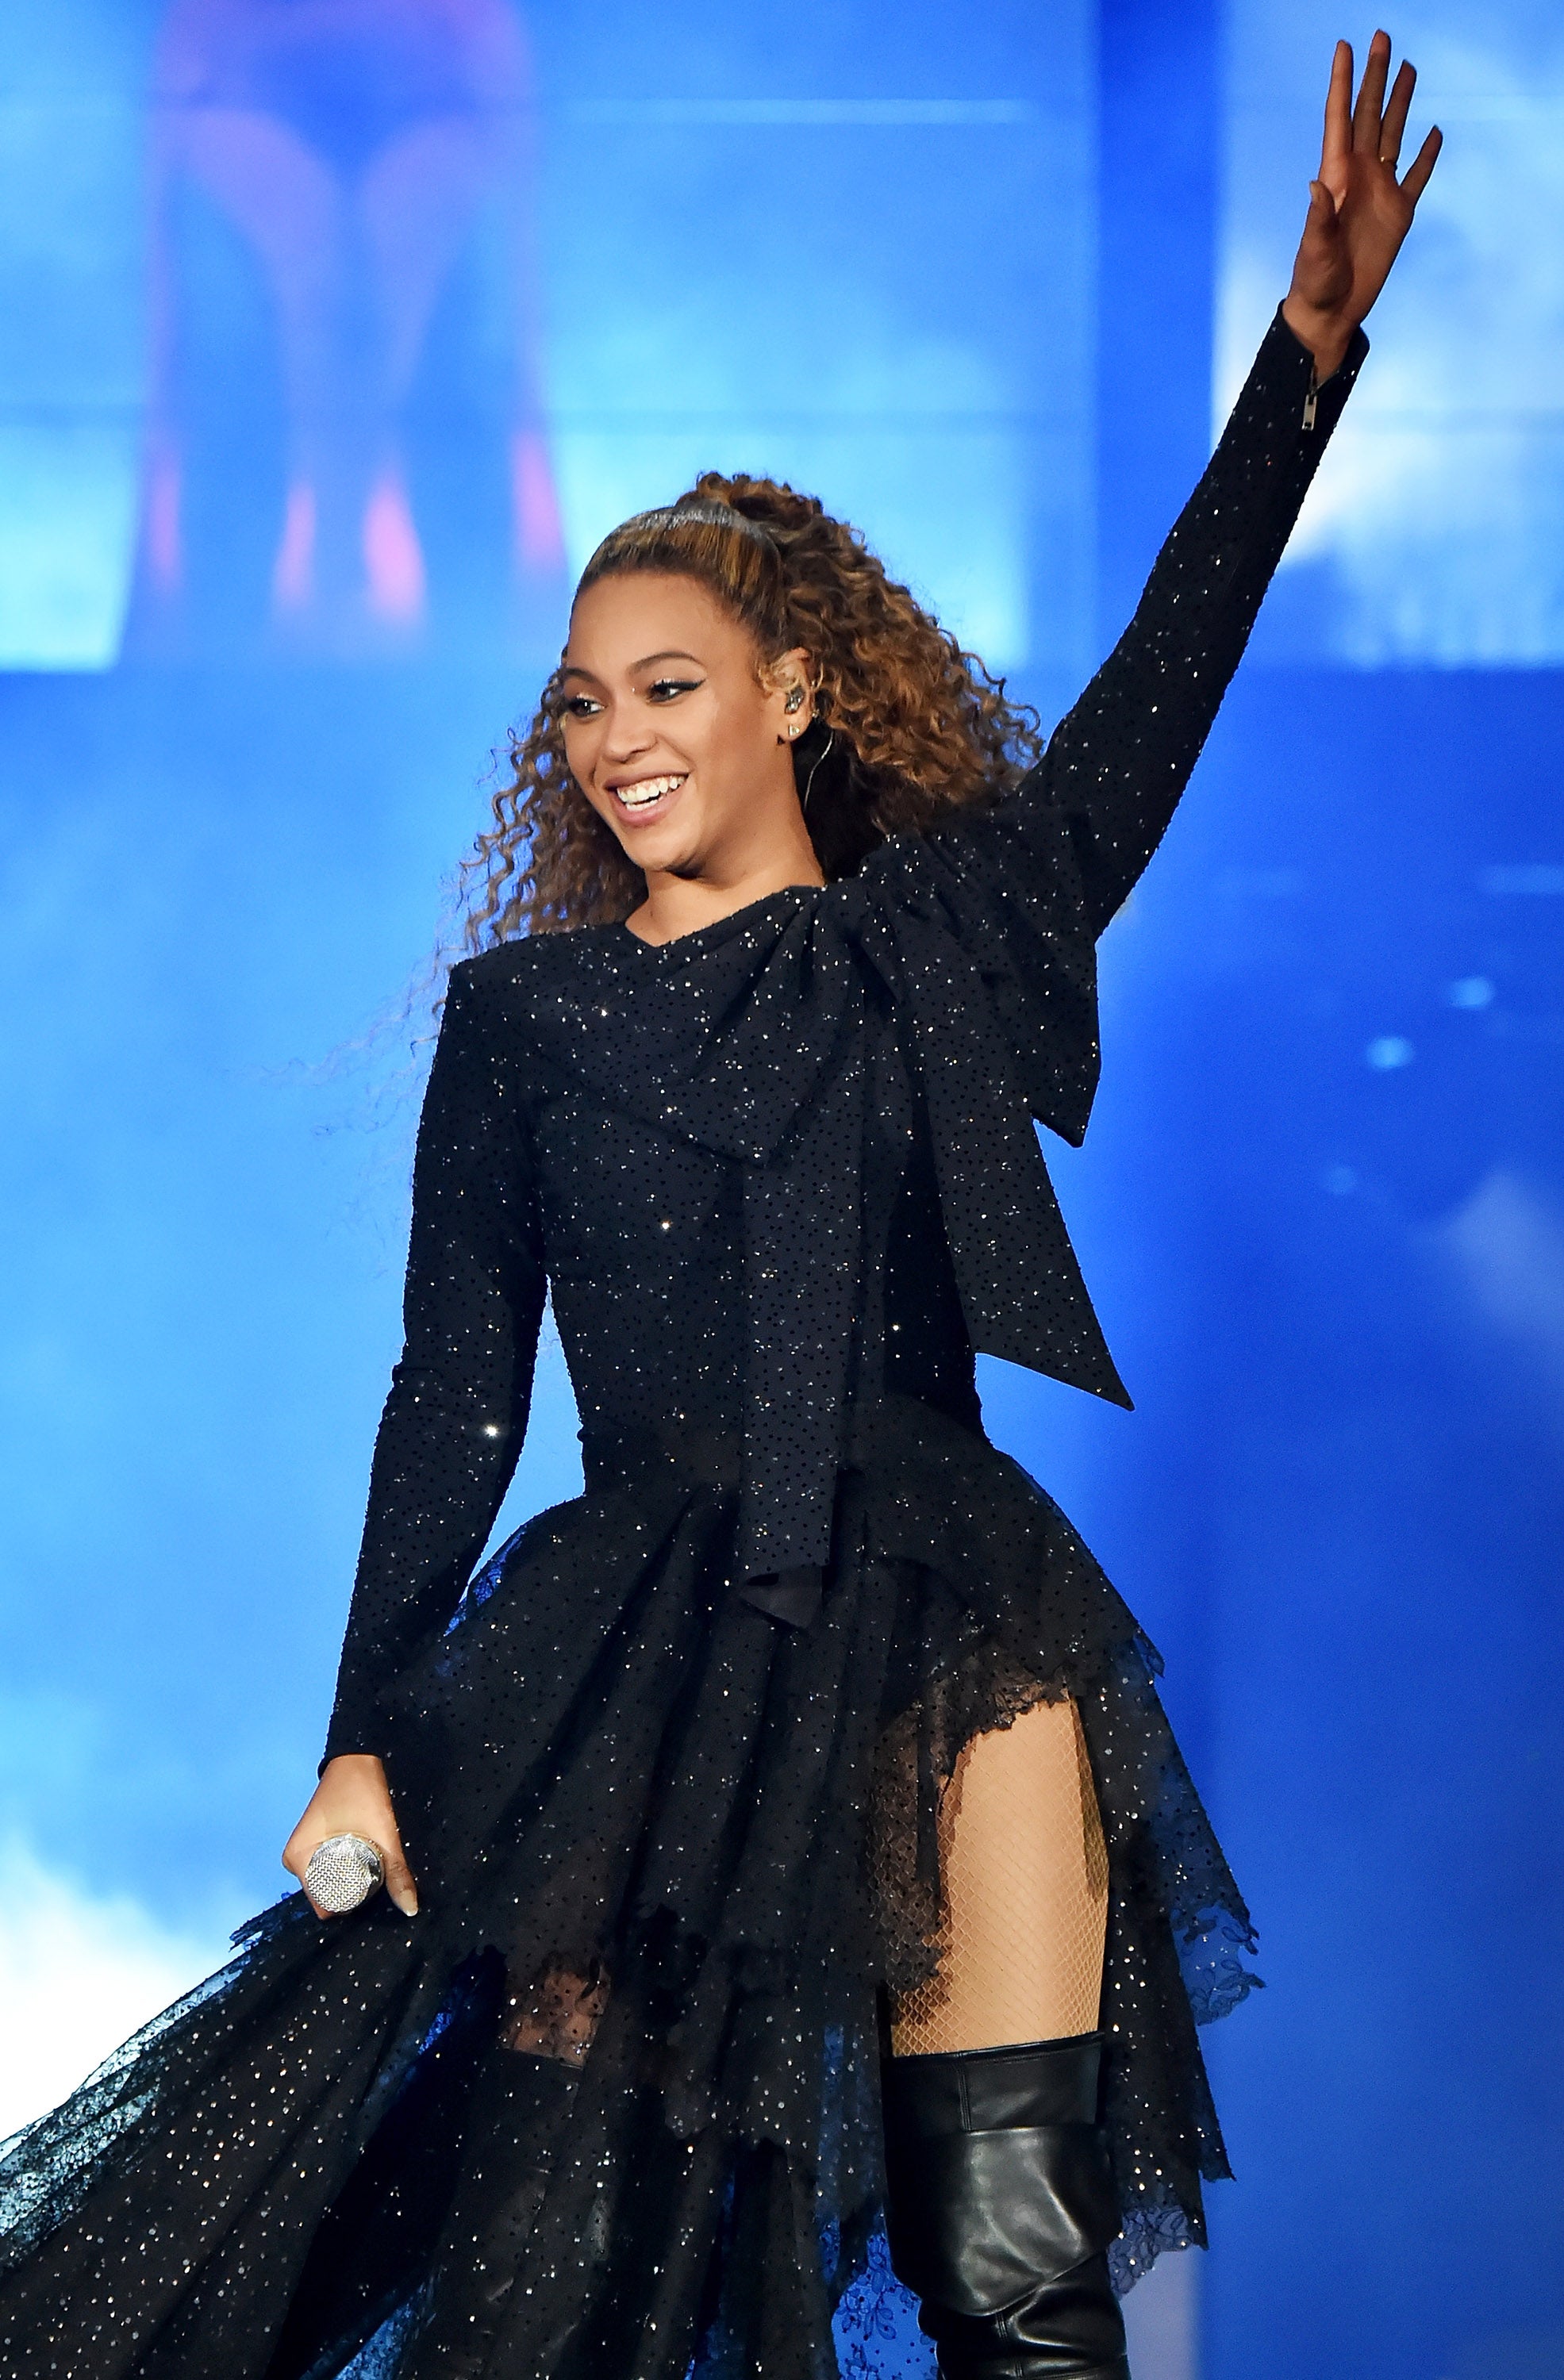 Beyoncé Is Sharing More Moments From Her Pregnancy With Twins Rumi And Sir